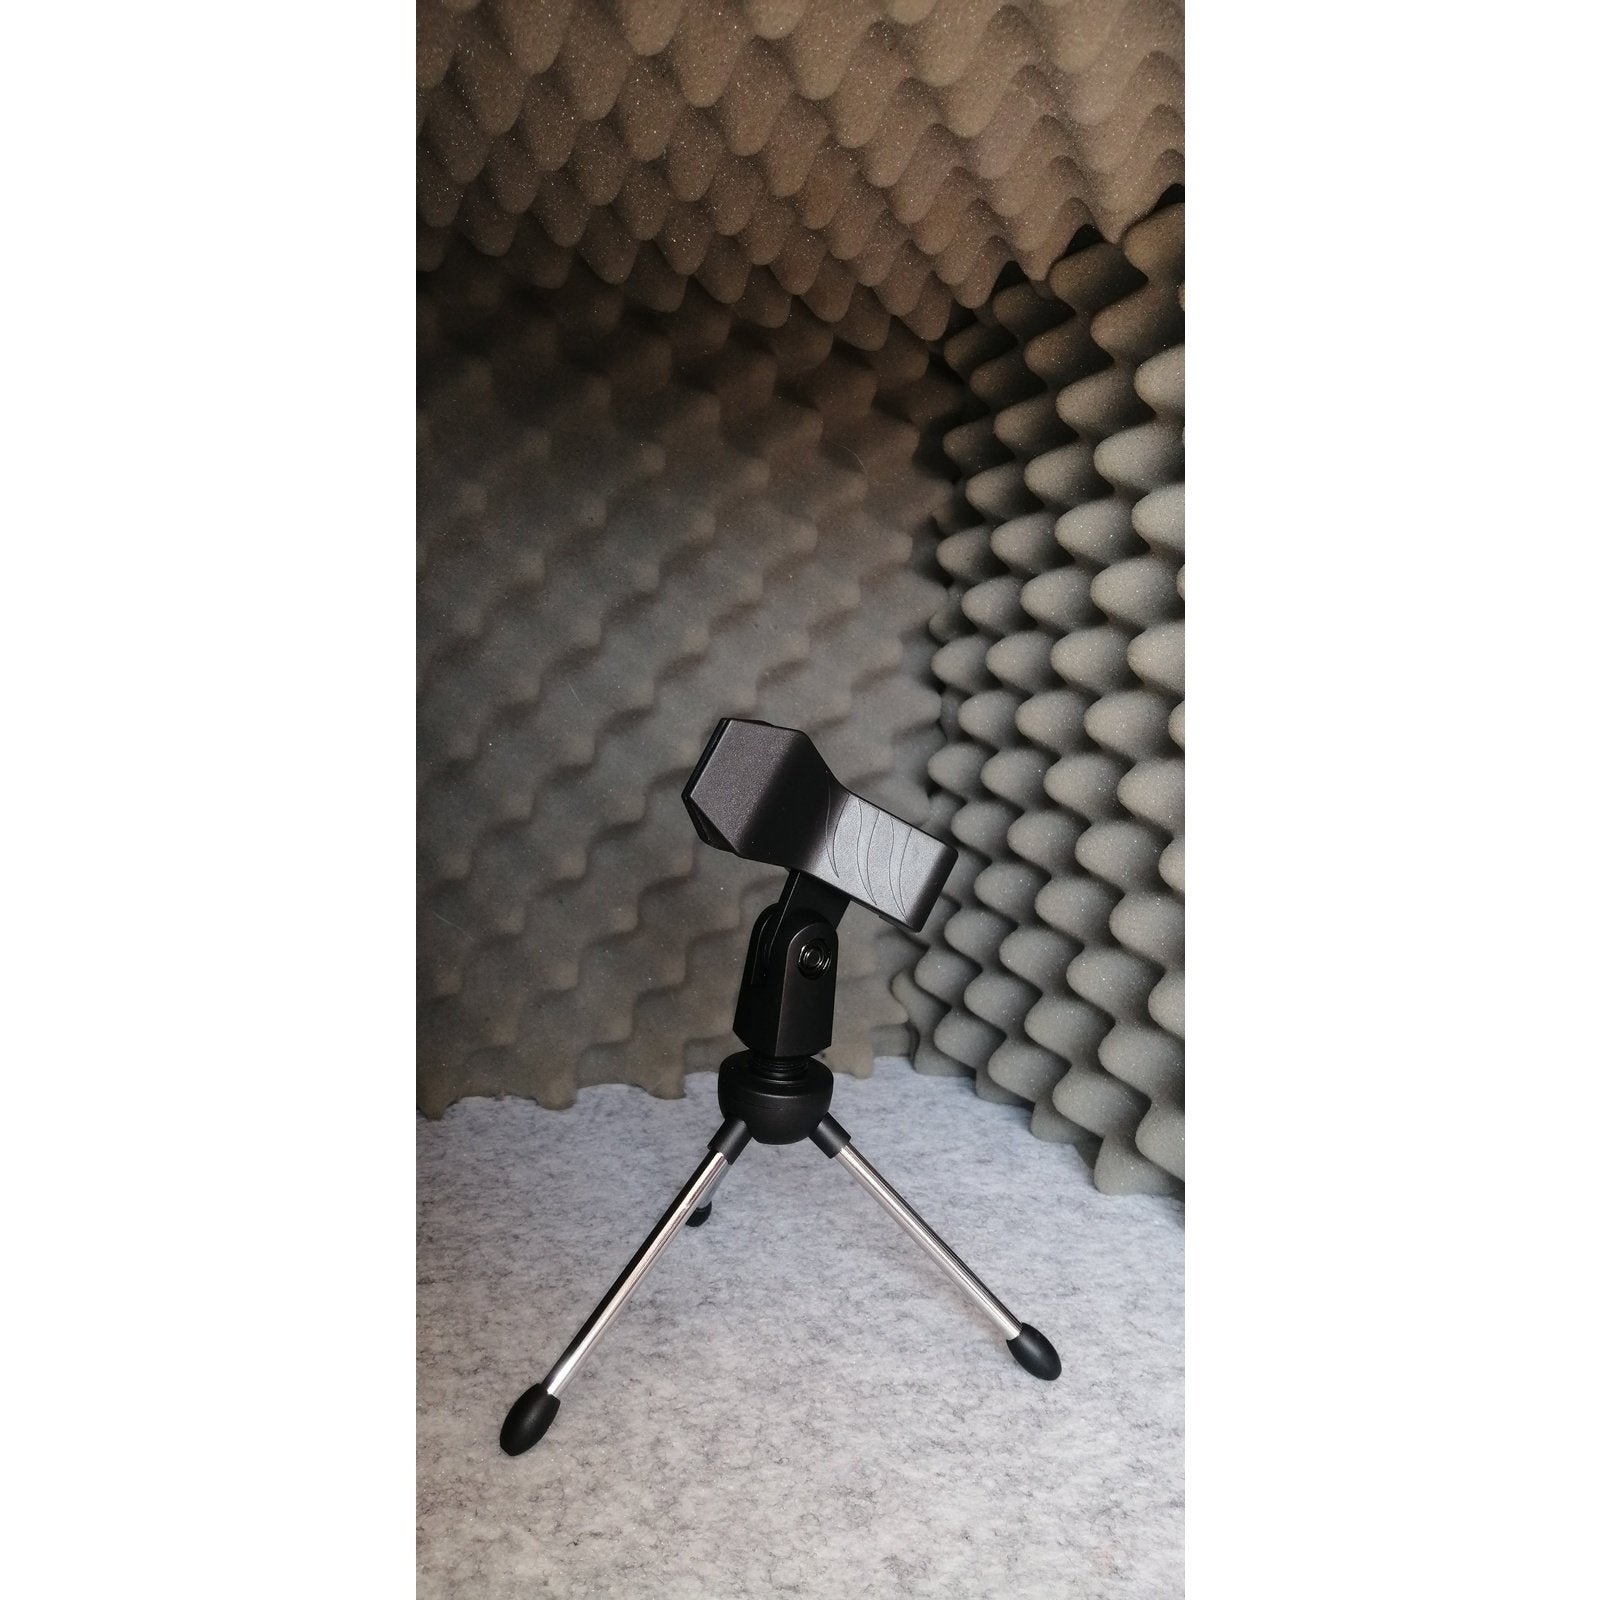 Acoustic vocal audio recording and isolation booth easy to set up